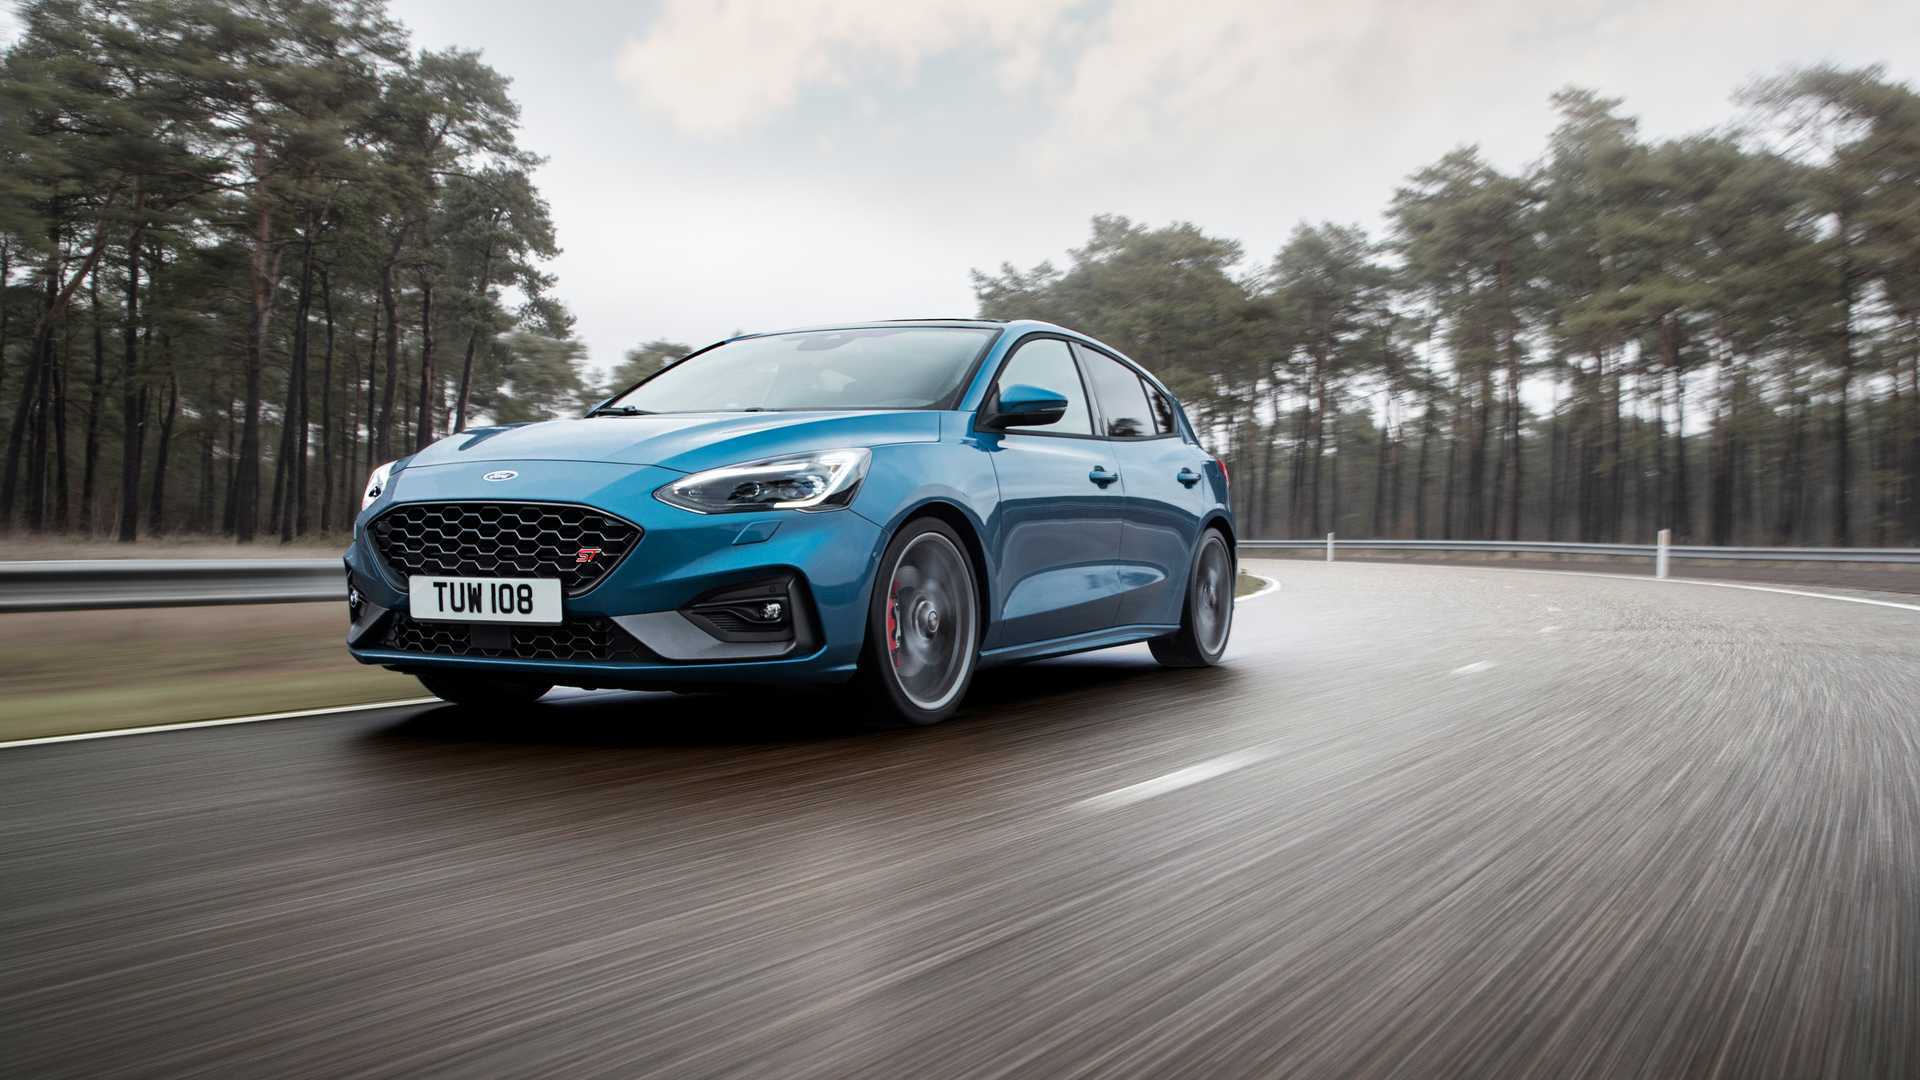 New Ford Focus ST Pictures and Wallpapers Gallery